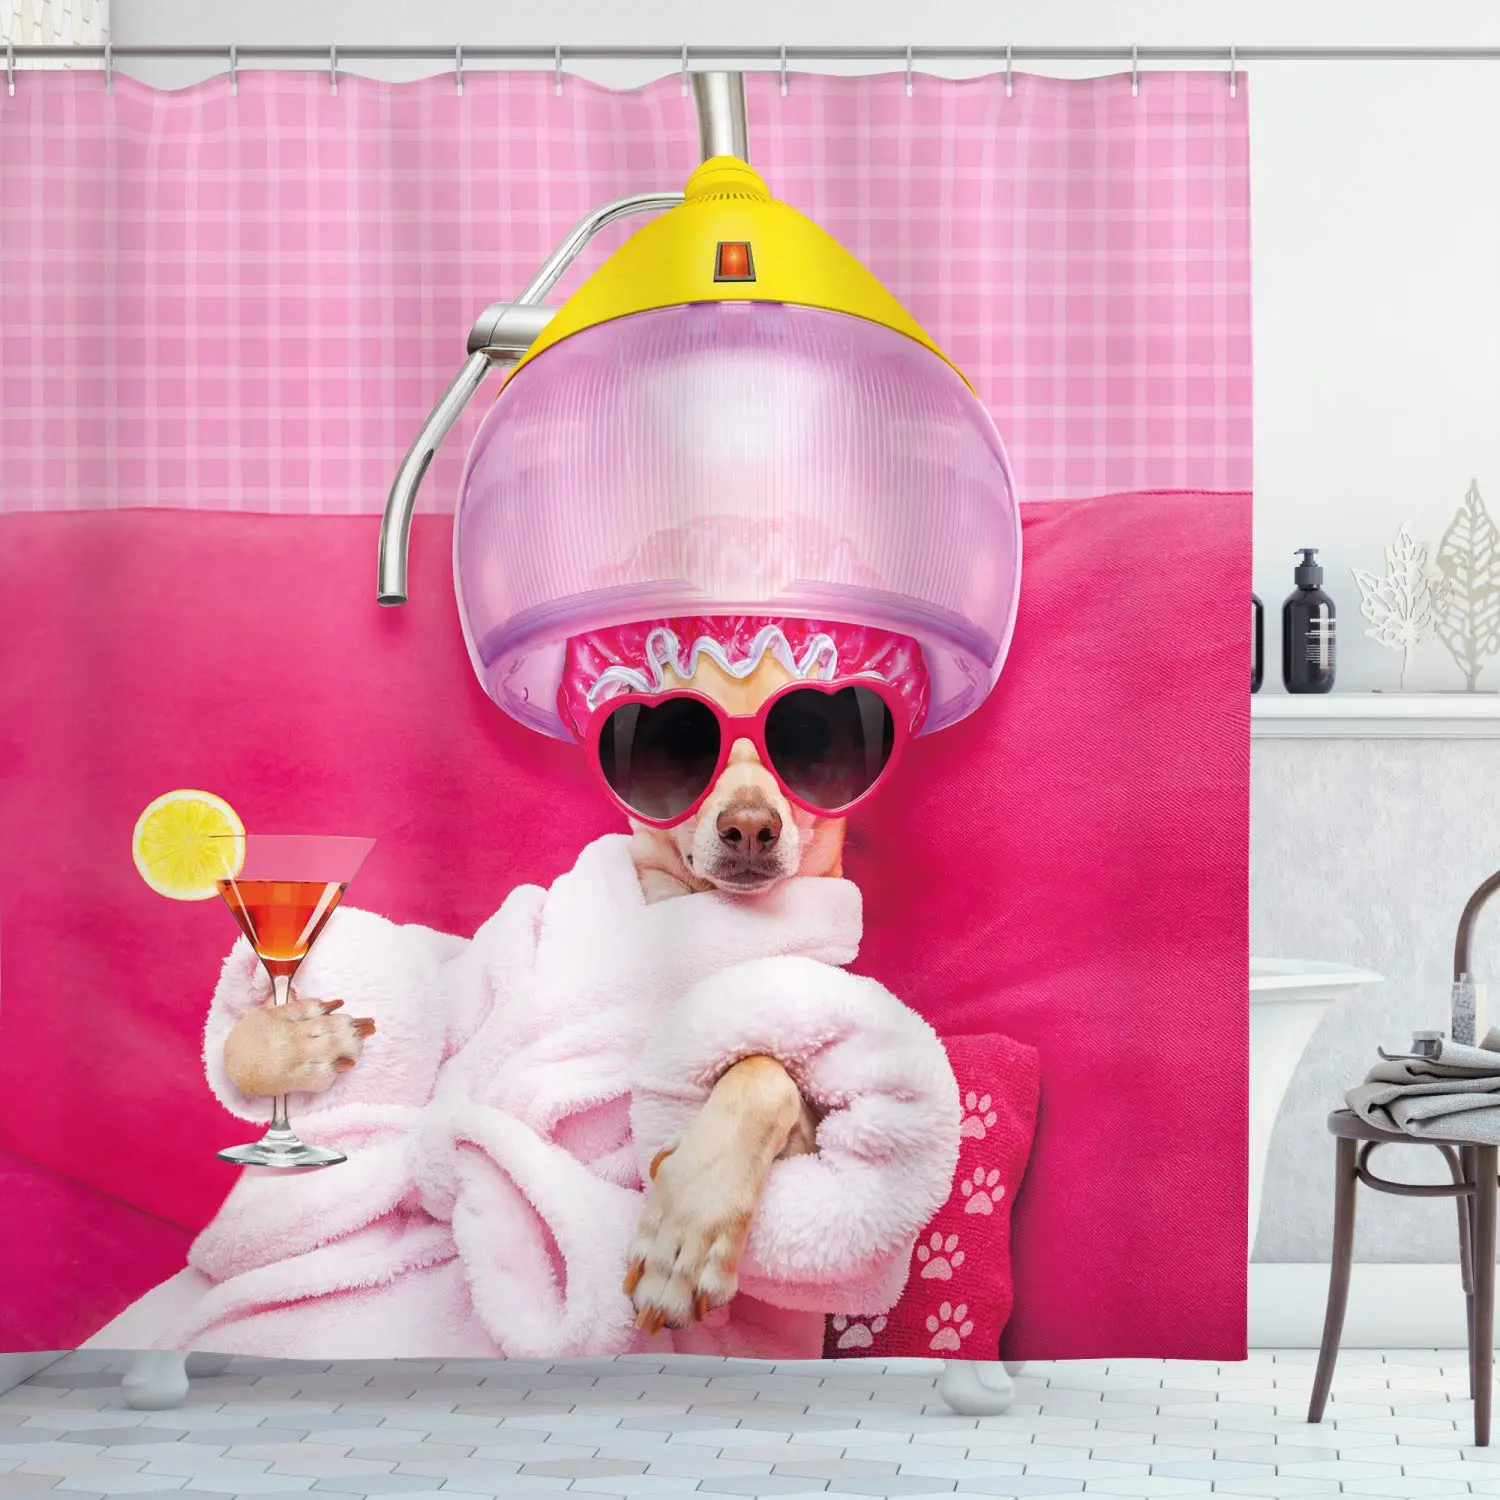 

Funny Pink Chihuahua Dog Shower Curtain Relaxing and Lying in Wellness Spa Fashion Puppy Comic Fabric Bathroom Decor Set